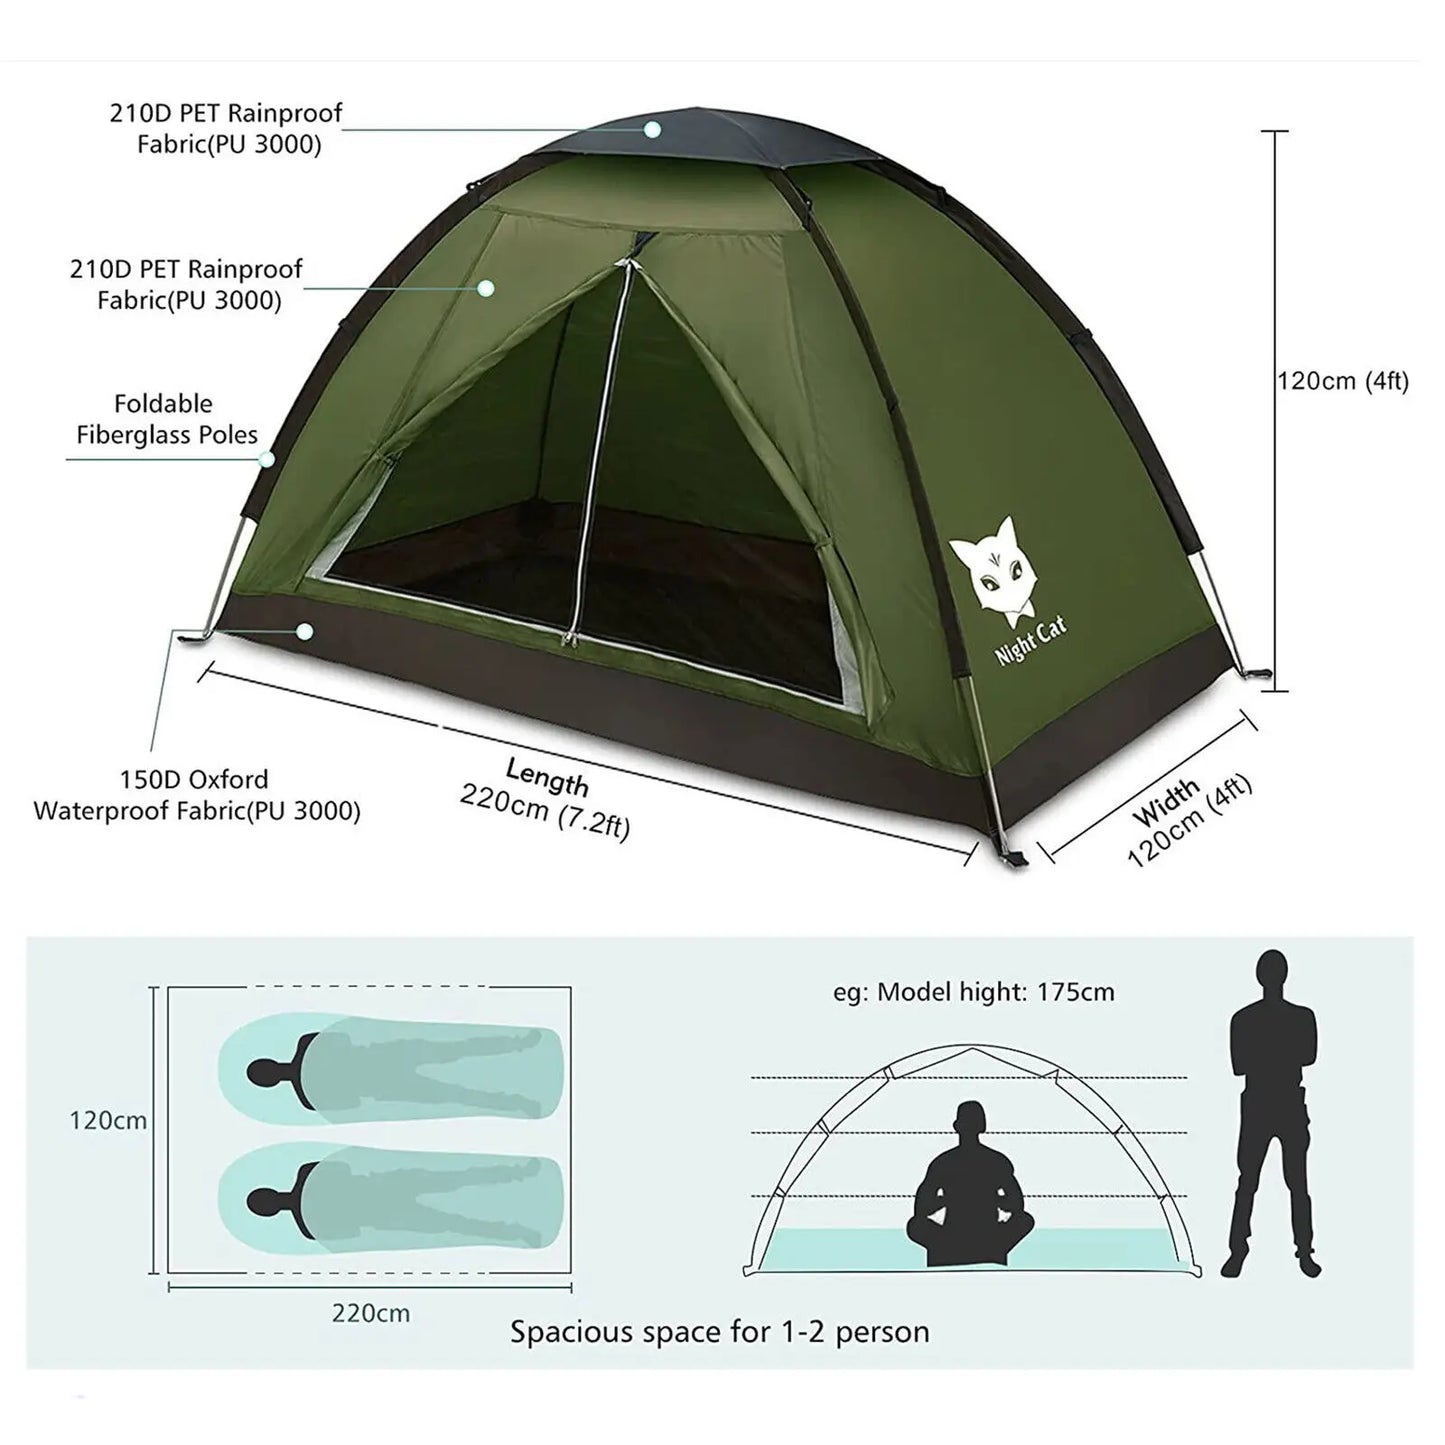 Night Cat Tent for 1 to 2 Persons, Lightweight Waterproof Camping Hiking Backpack Tent